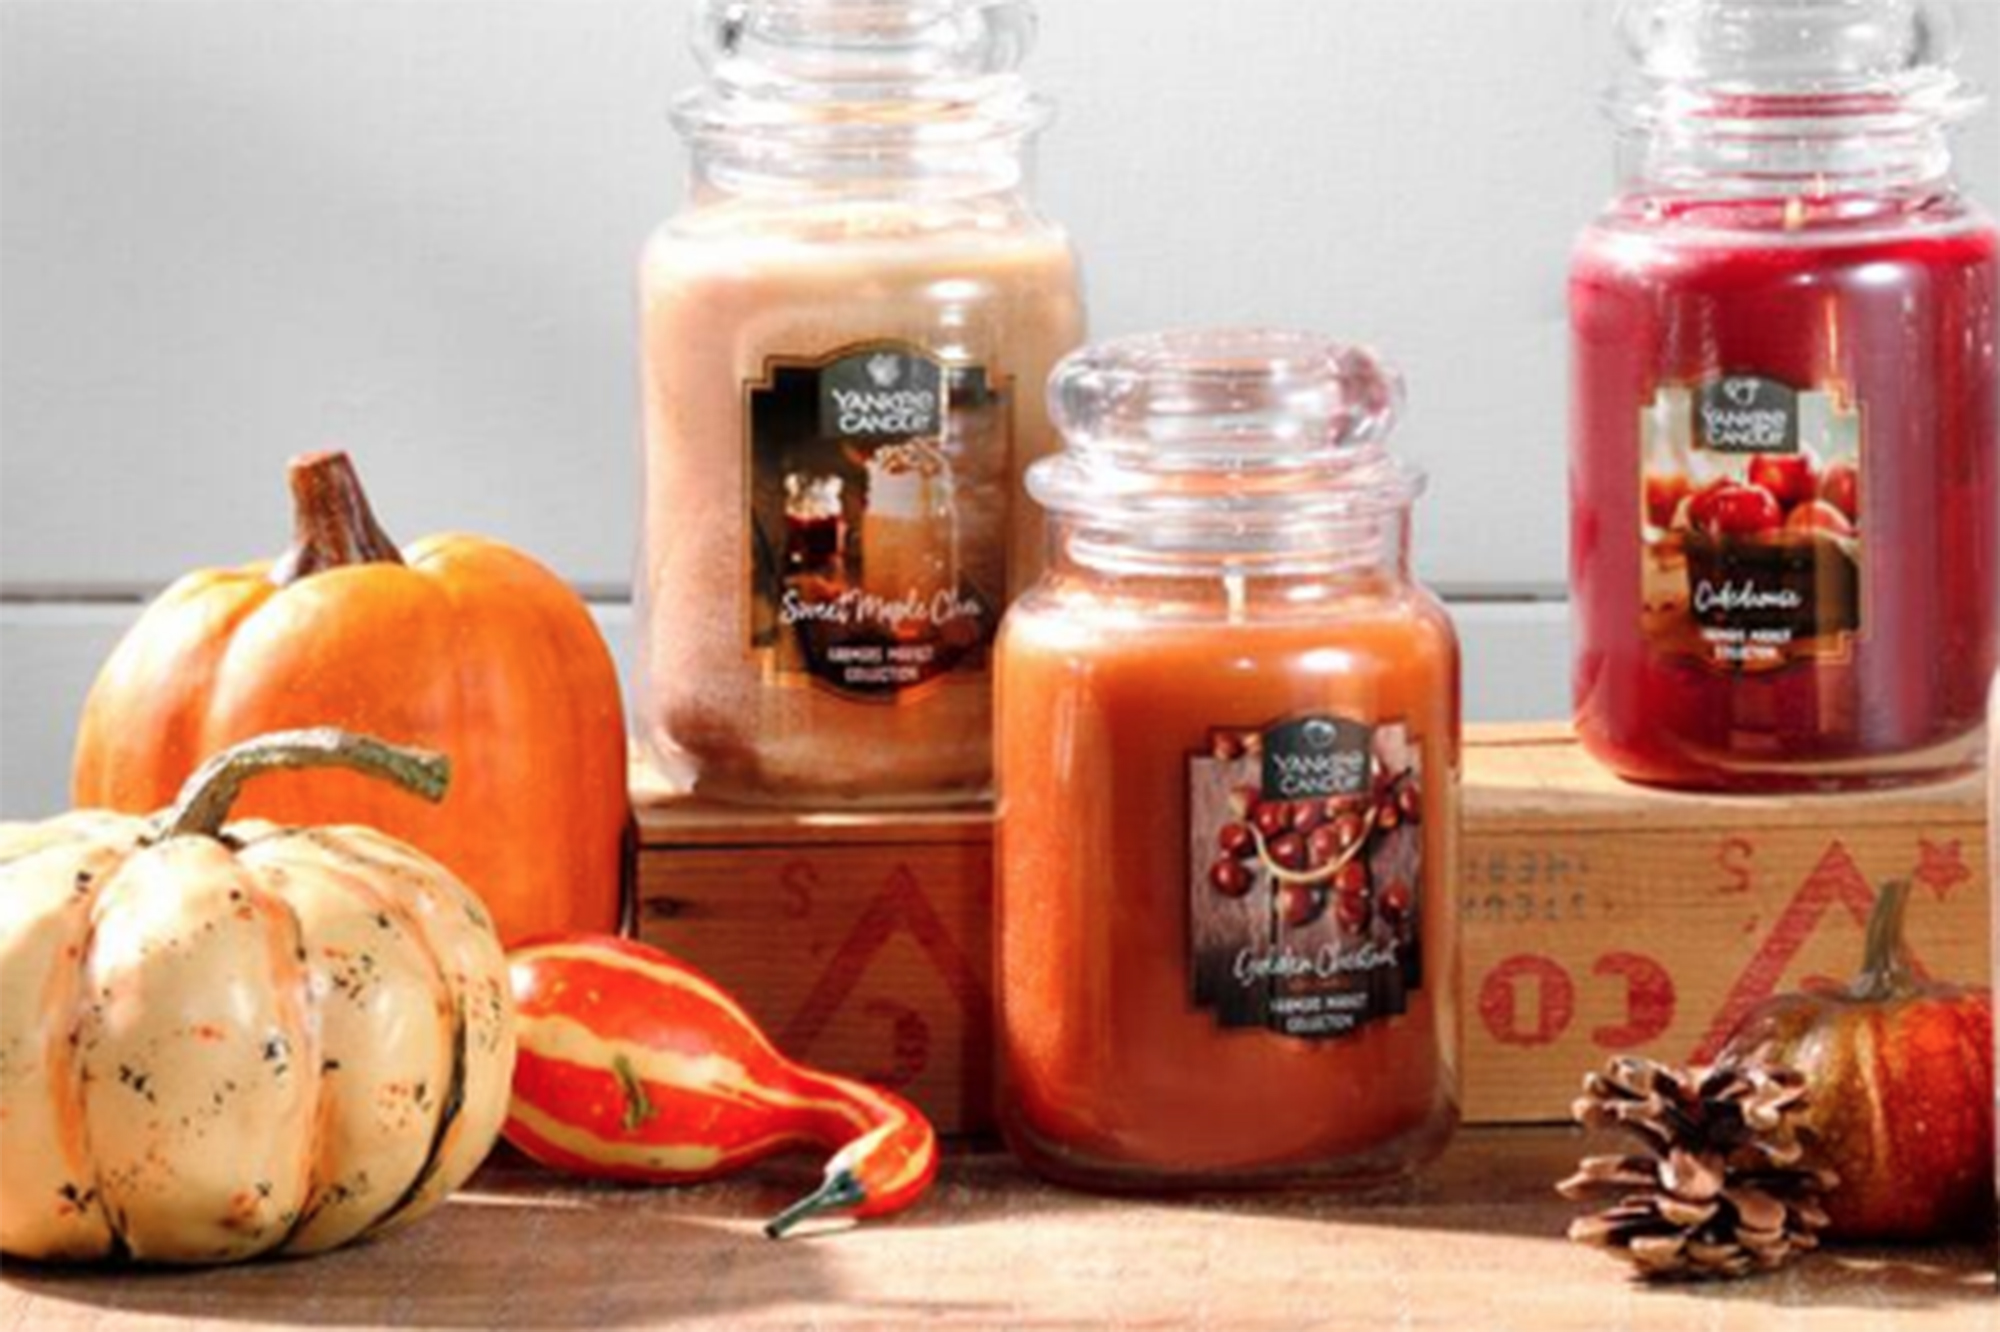 Stock Up on Our 5 Favorite Fall Scents From Yankee Candle